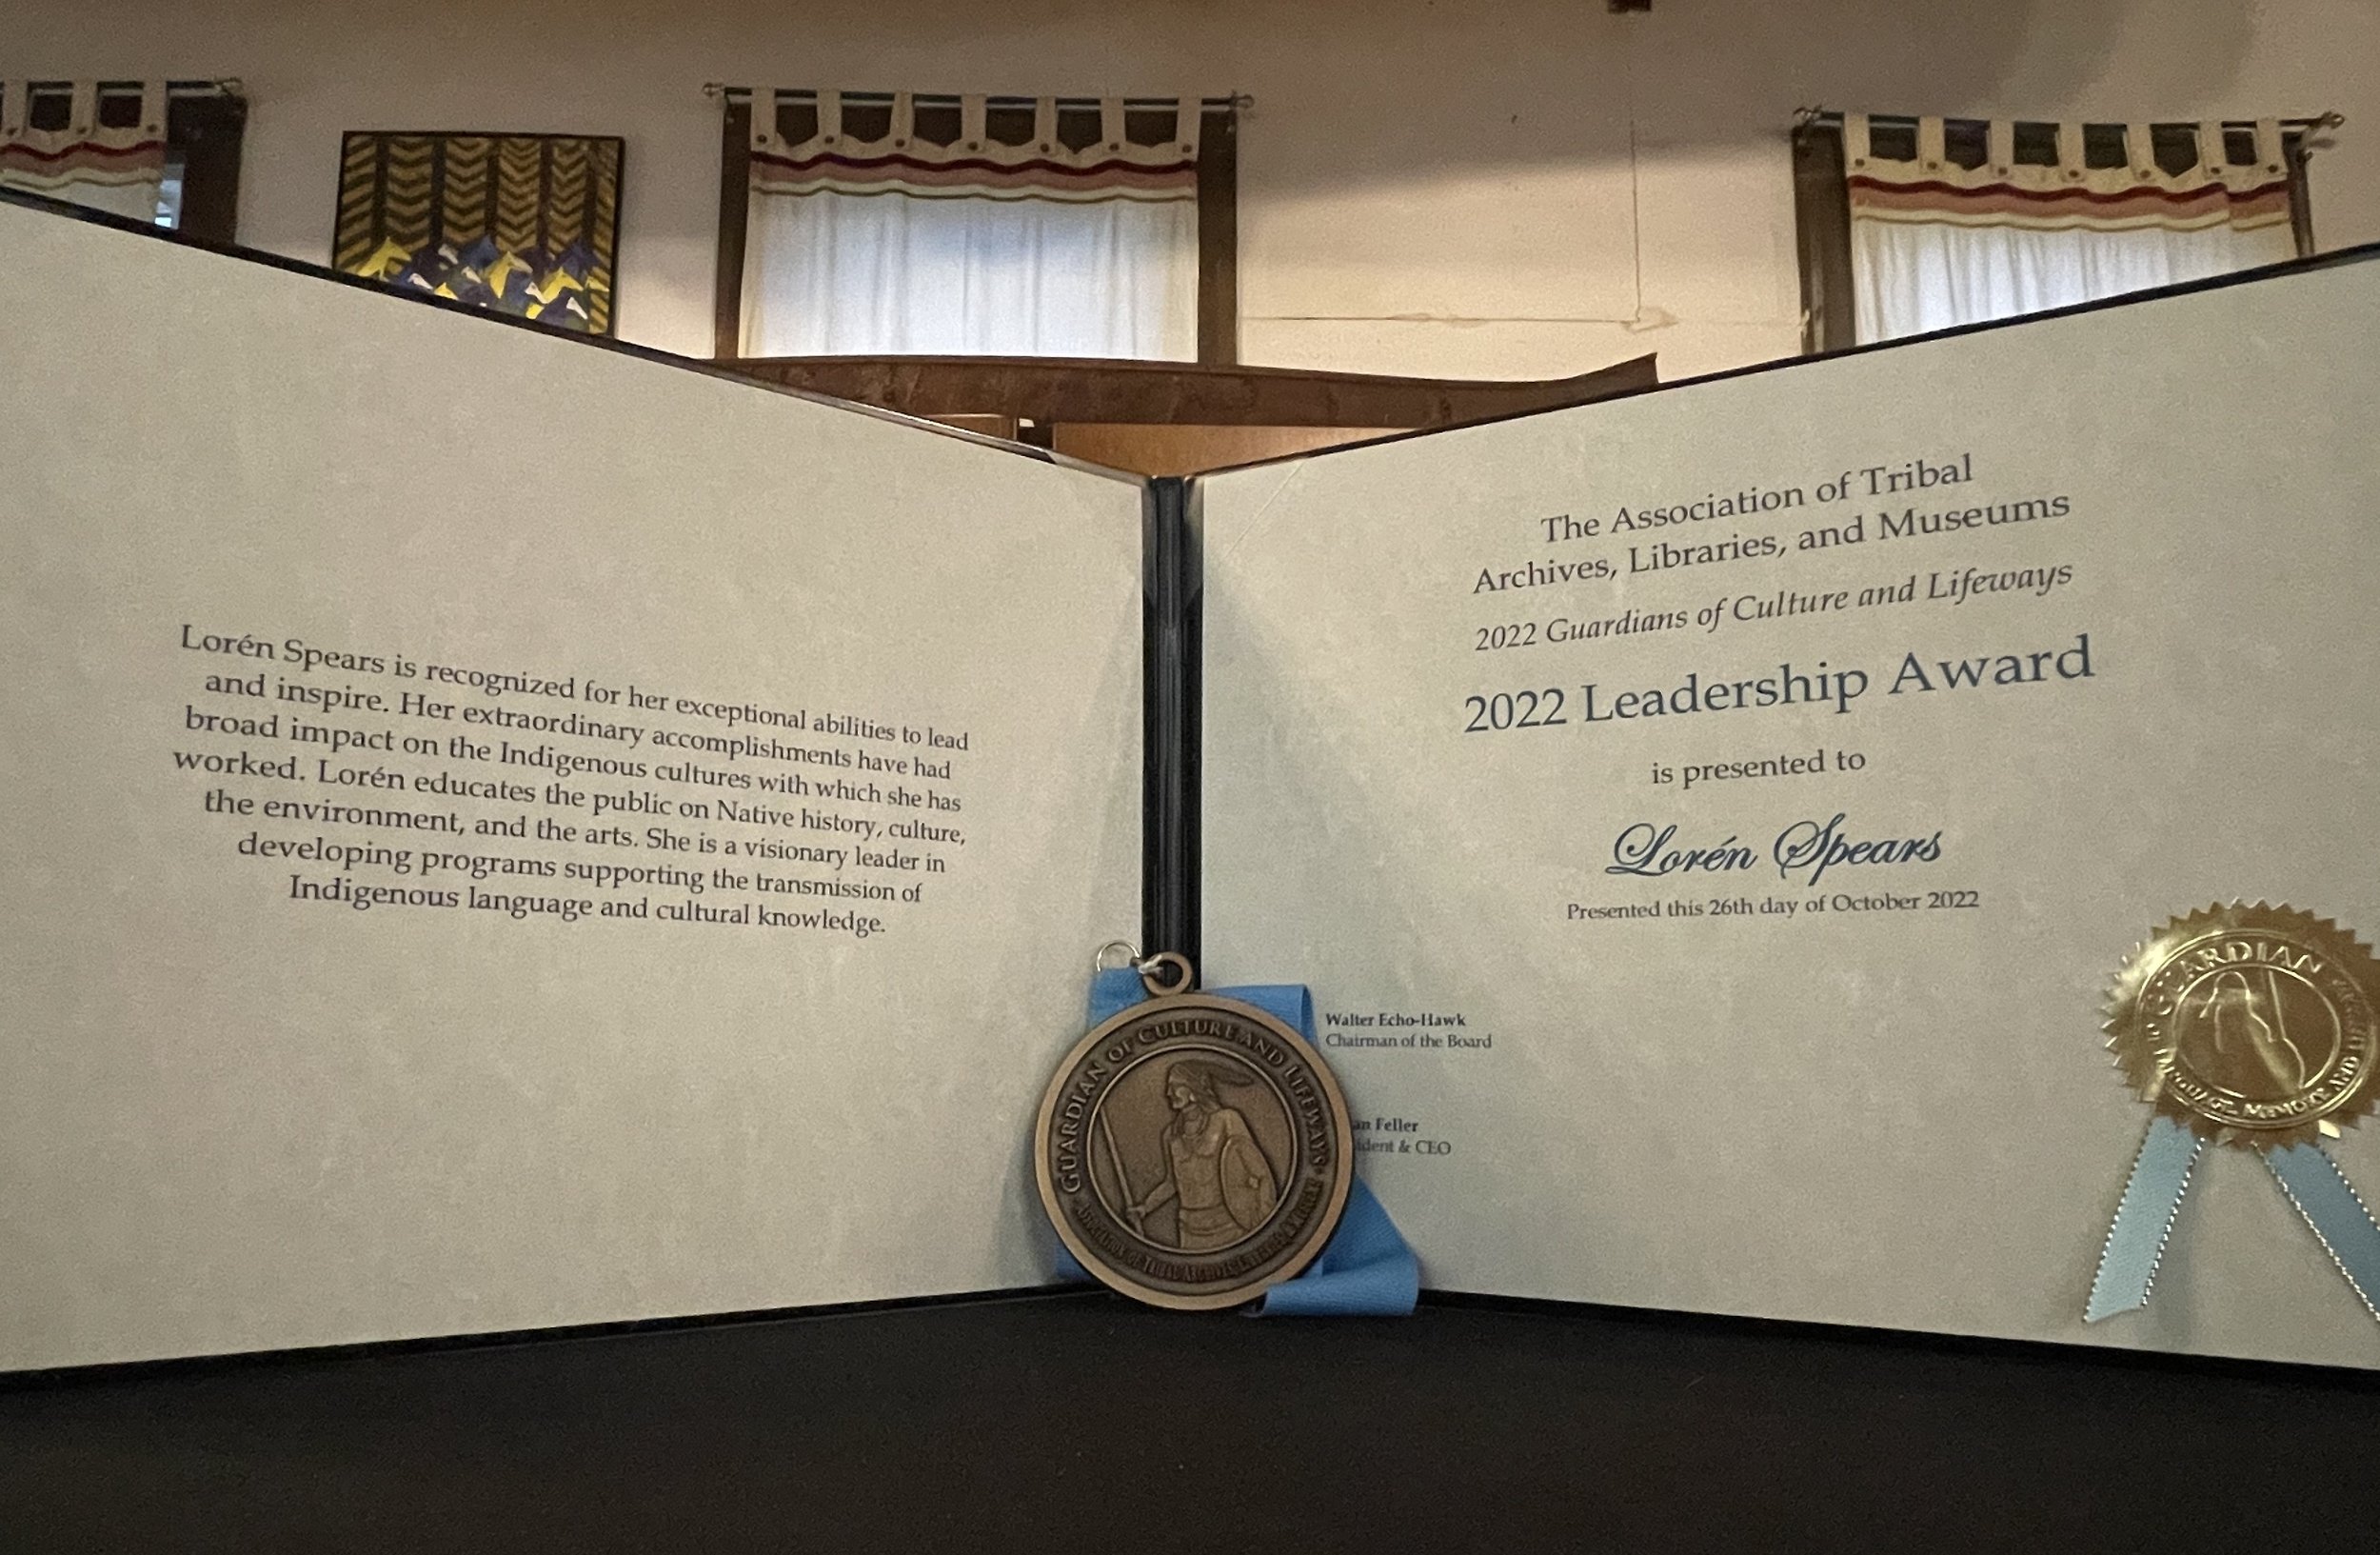 The Association of Trial Archives, Libraries, and Museums 2022 Leadership Award